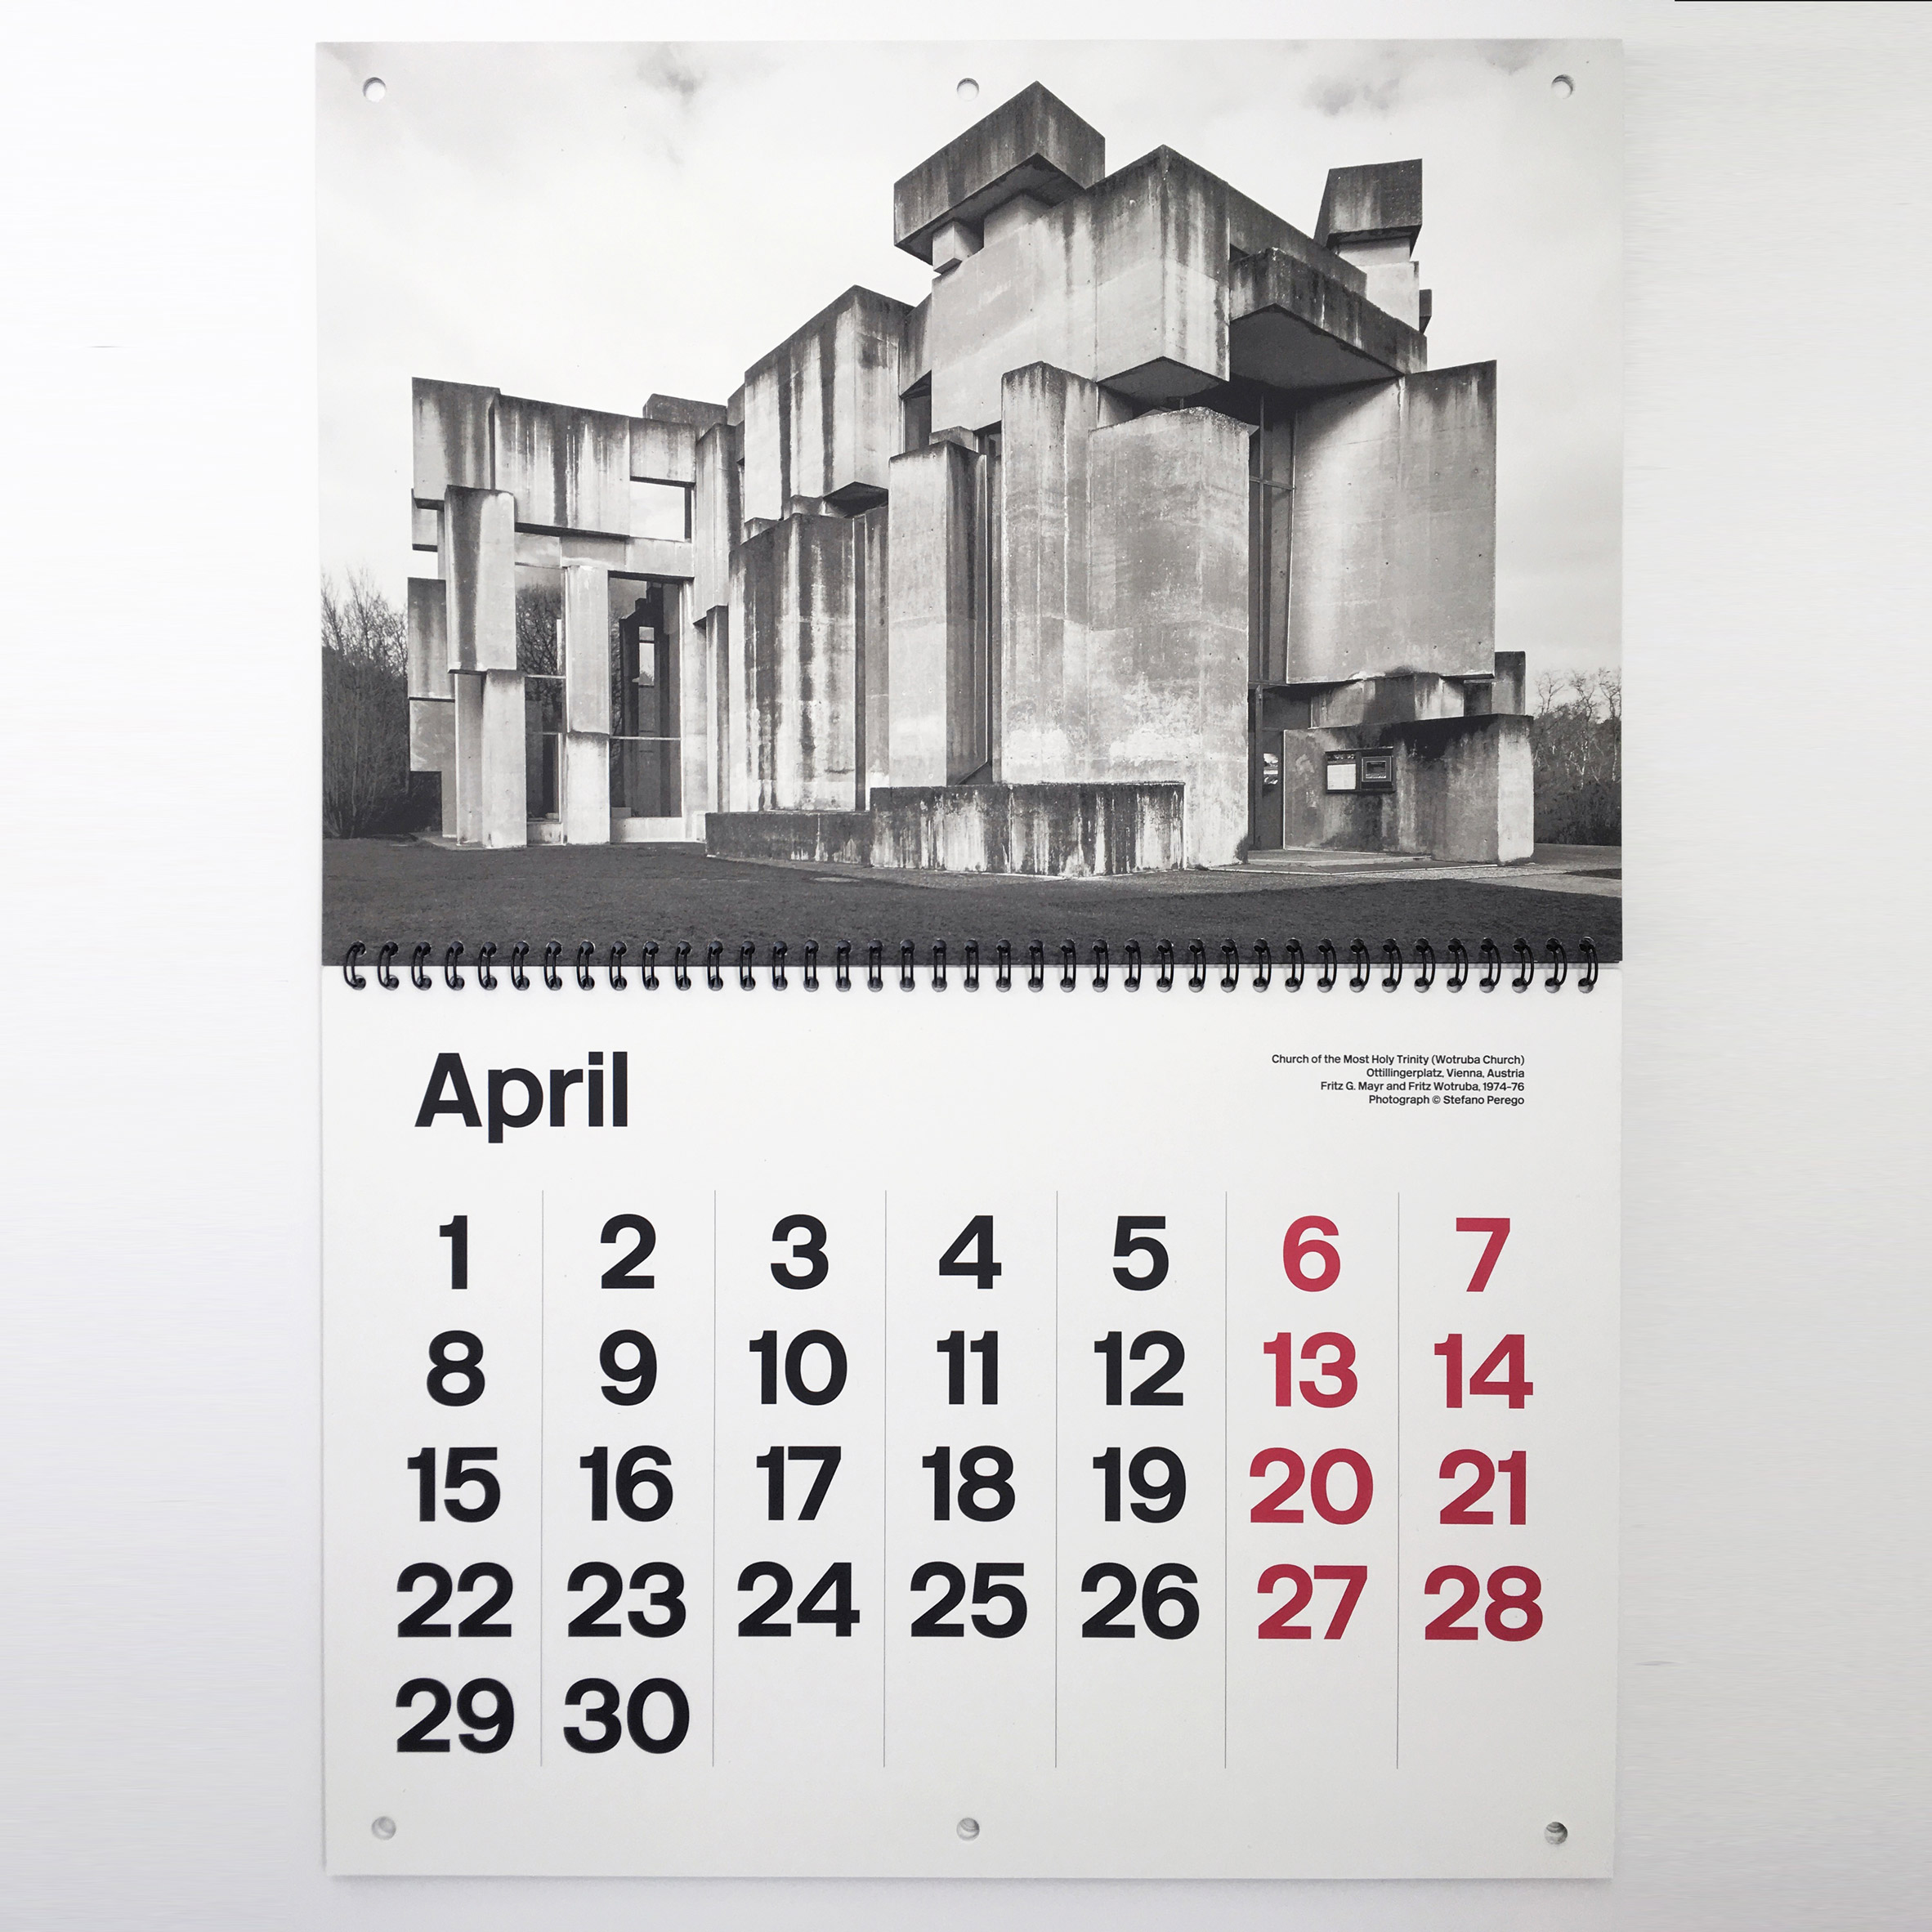 Christmas 2018 gifts for architects and designers: Brutalist Calendar by Blue Crow Media